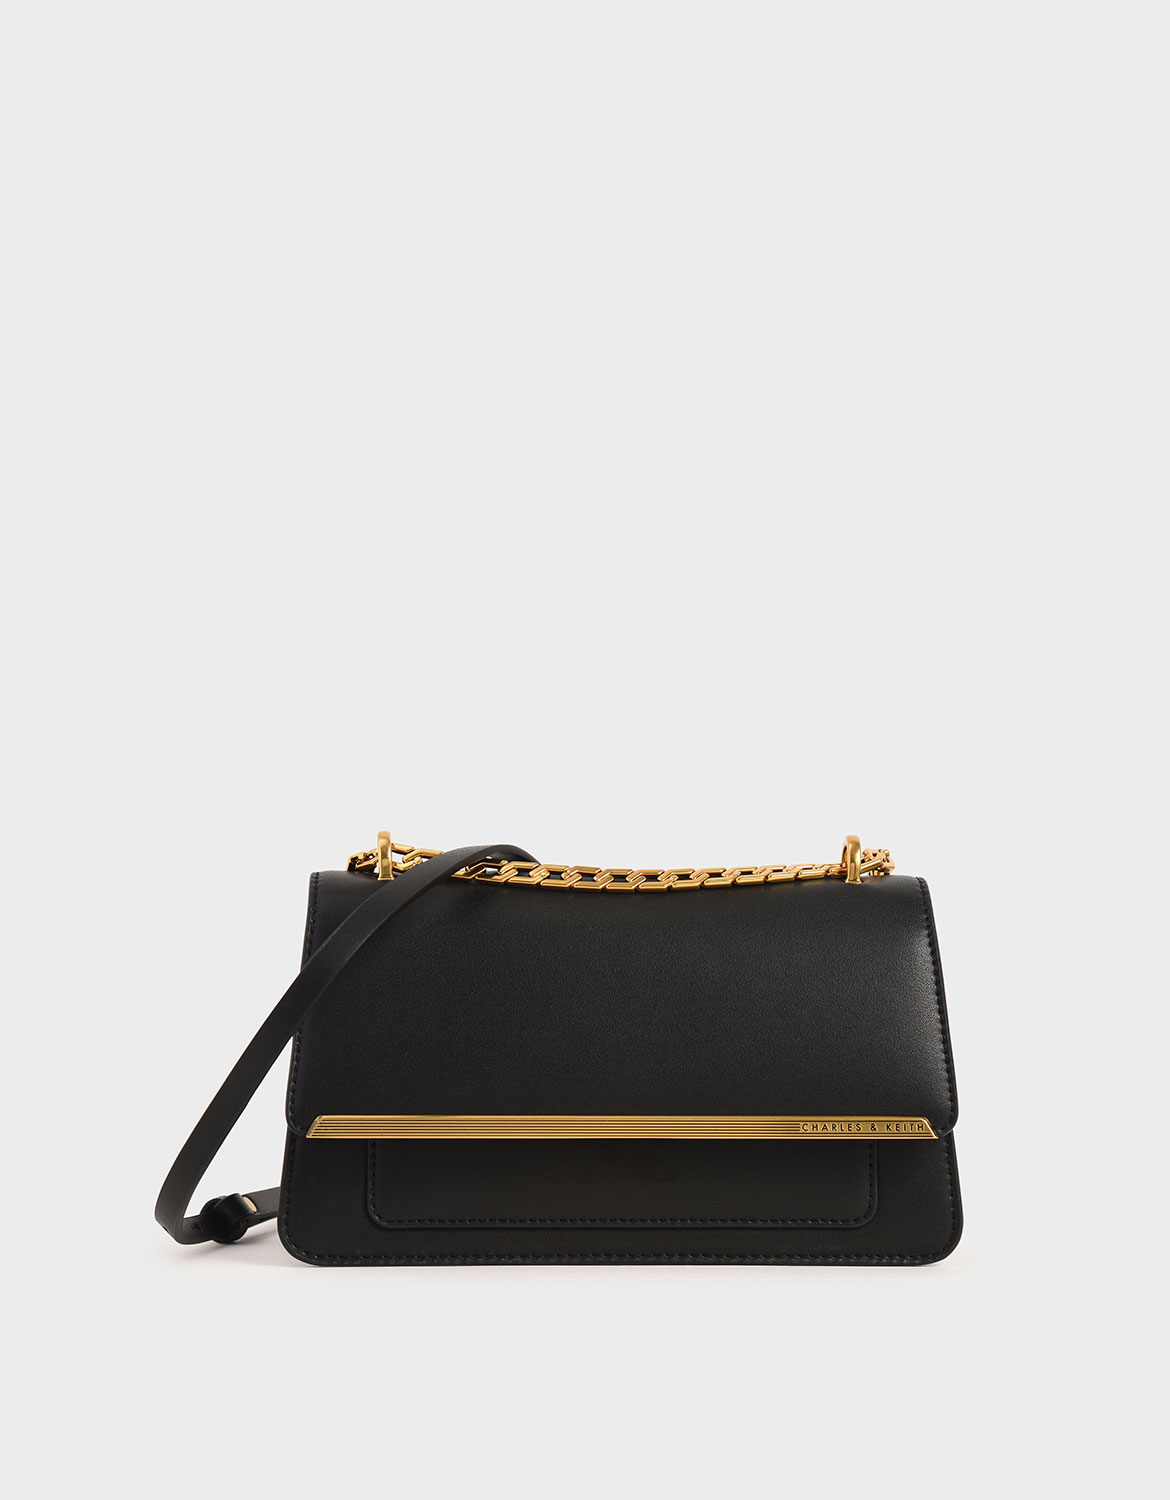 Black Metallic Accent Evening Clutch - CHARLES & KEITH KR